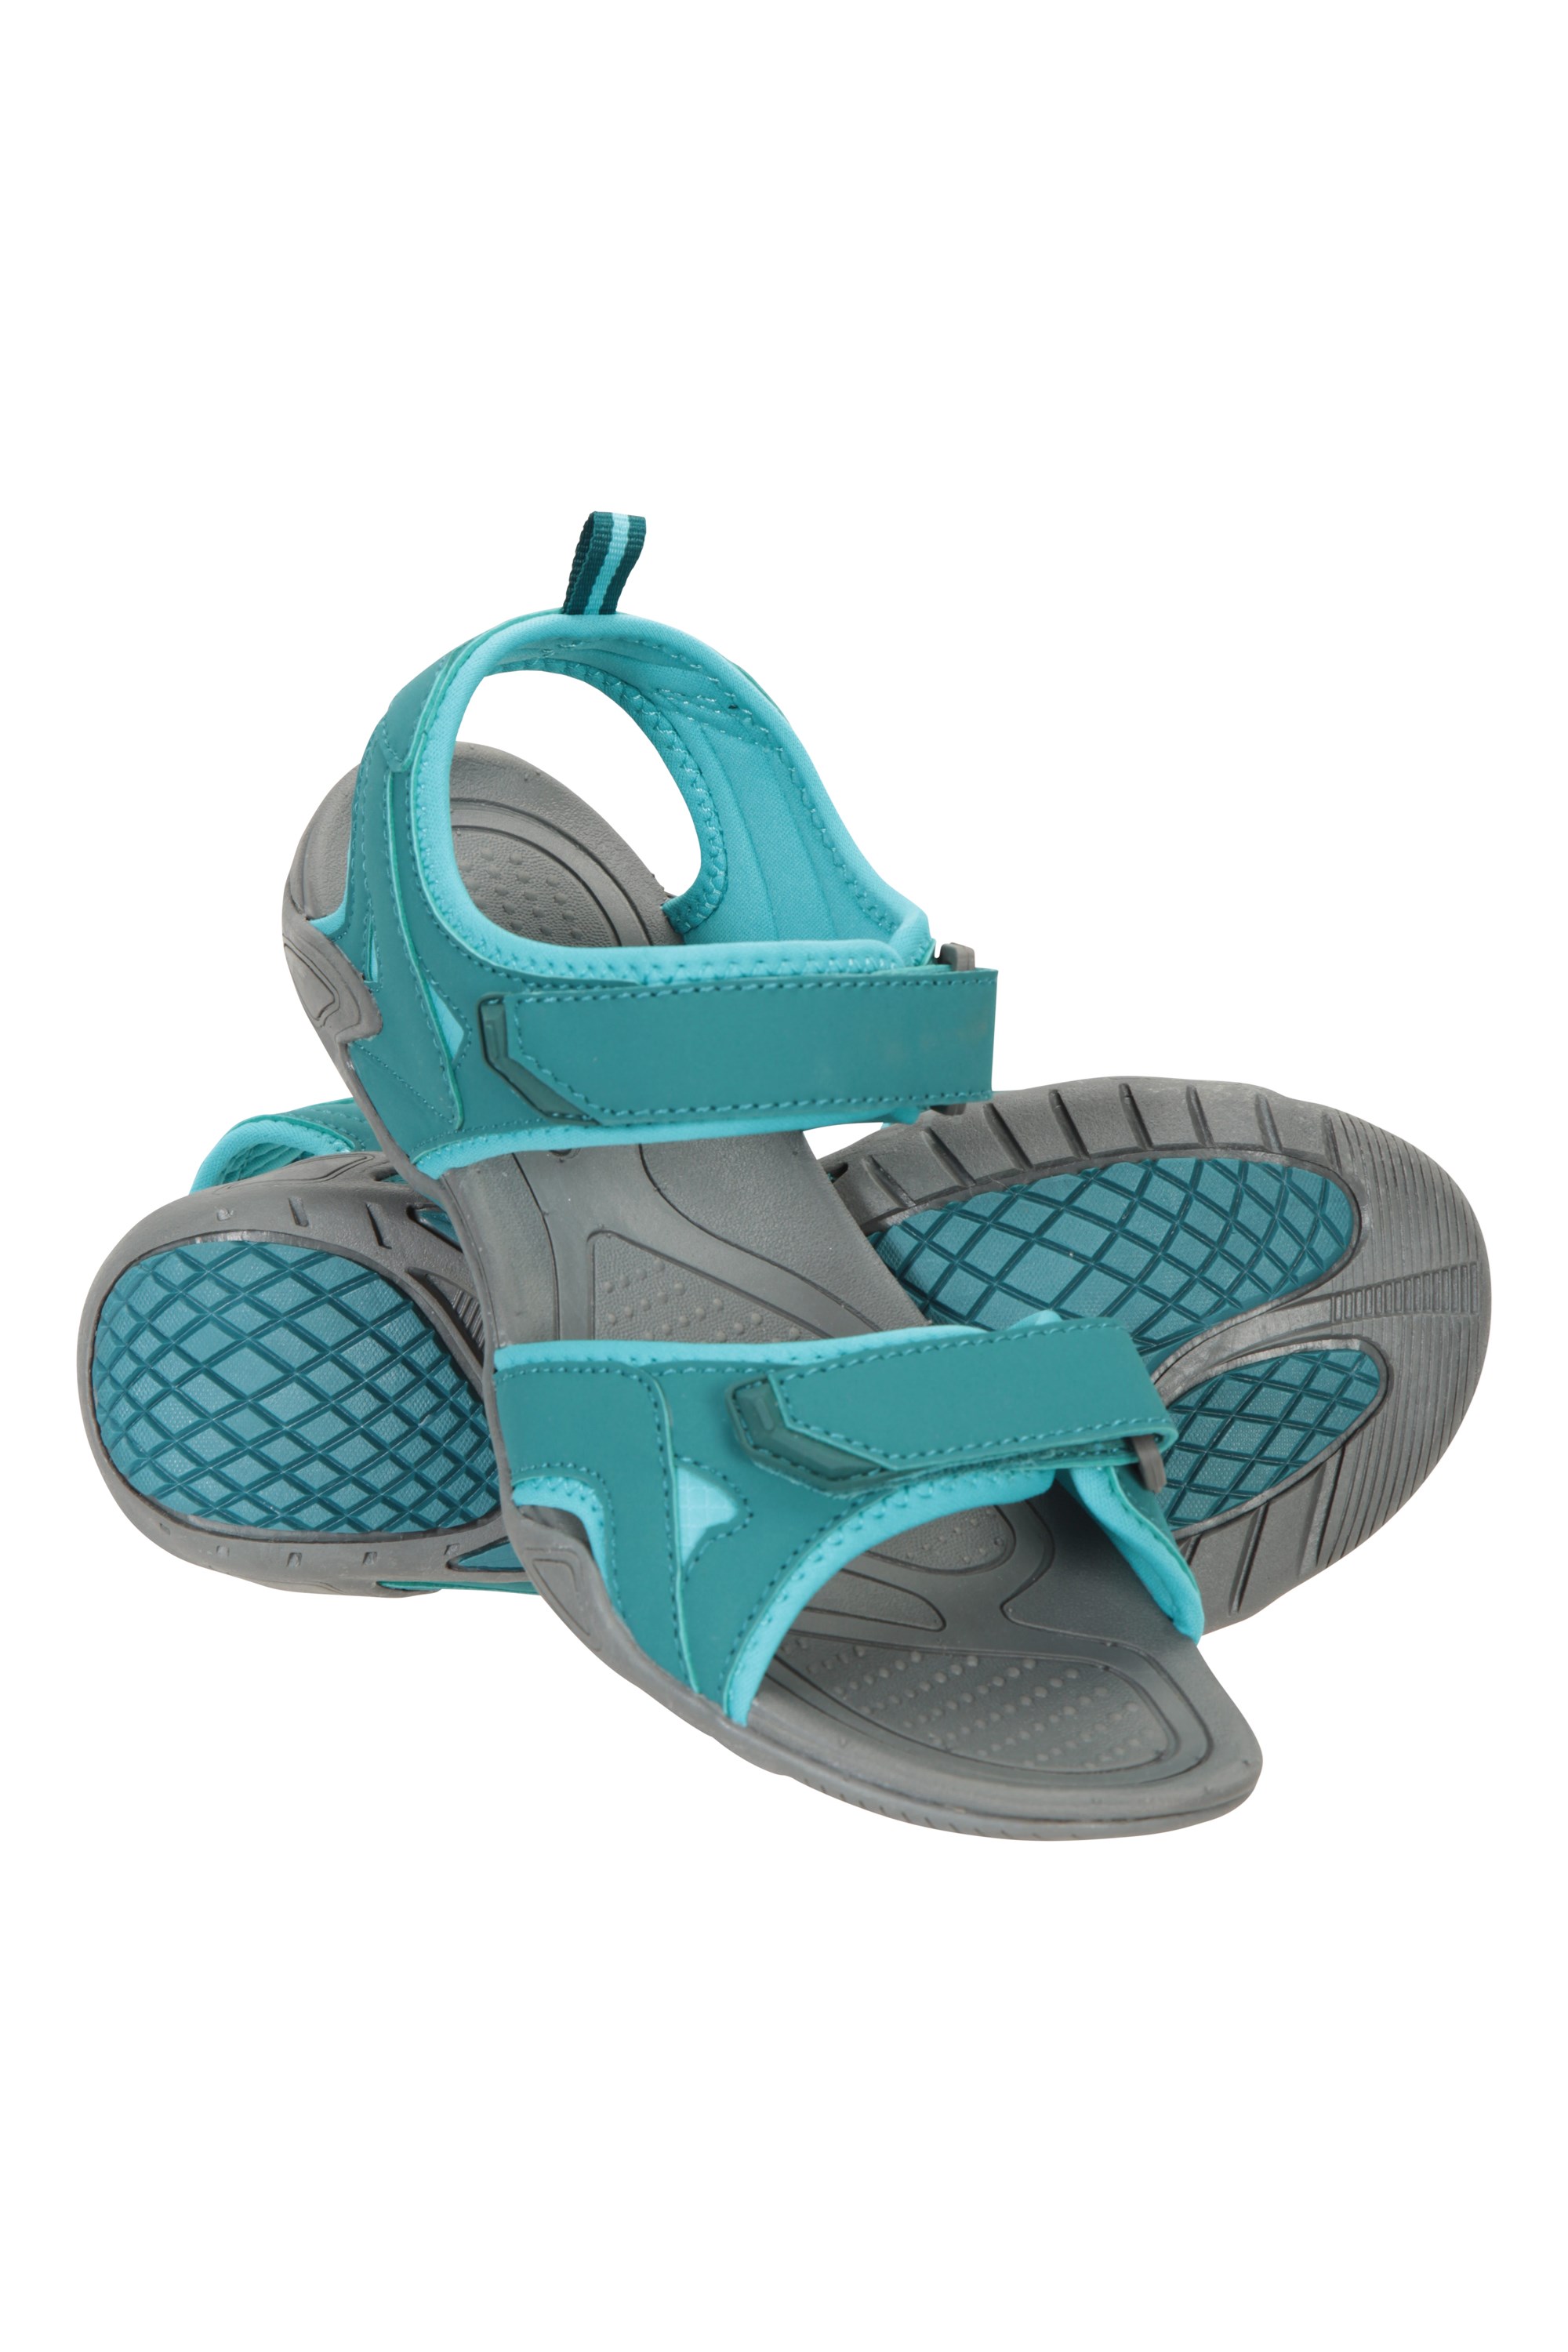 Andros Womens Sandals - Teal